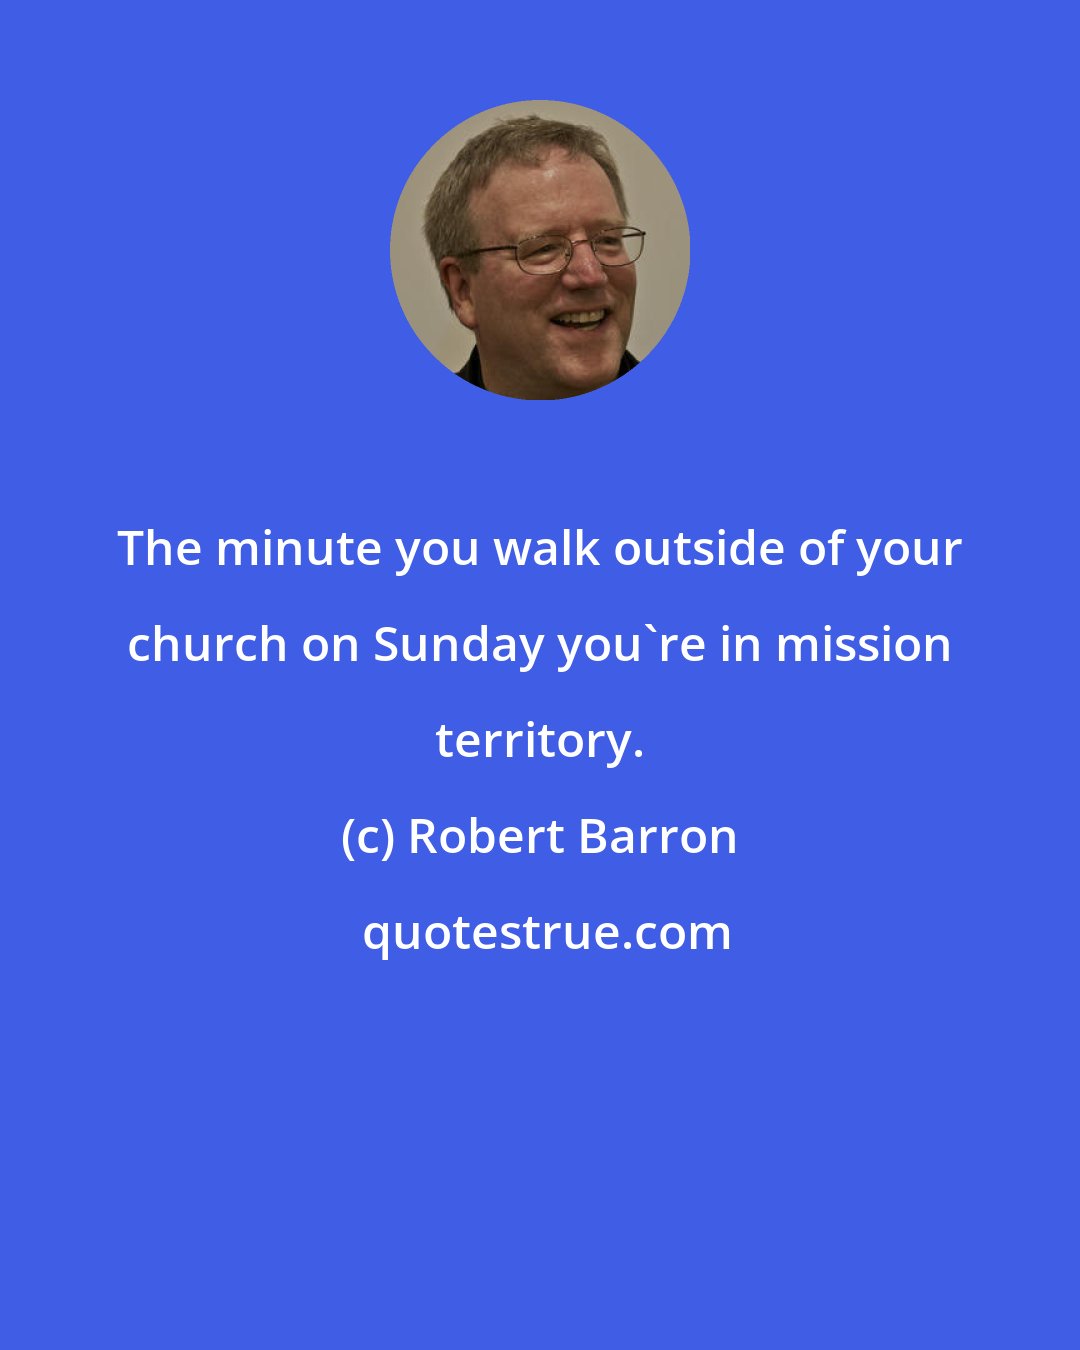 Robert Barron: The minute you walk outside of your church on Sunday you're in mission territory.